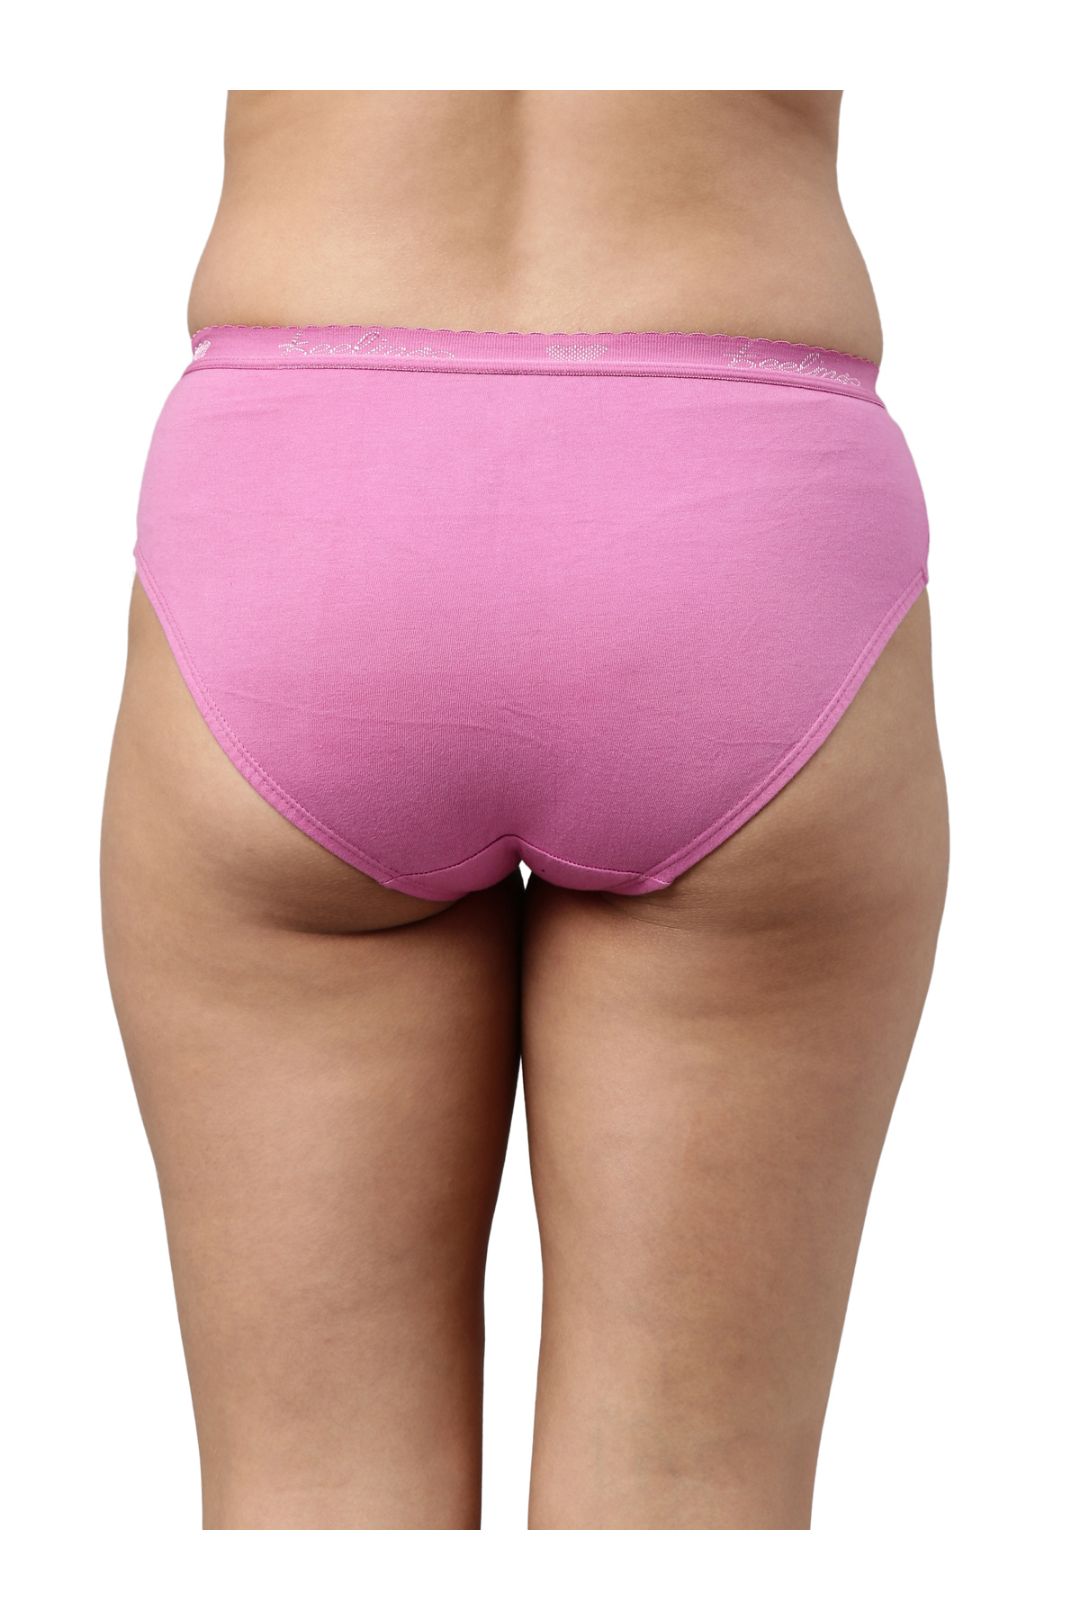 Feelings Women's Outer Elastic Cotton Hipster Panty Plain - Assorted Colours (Amelie-103)